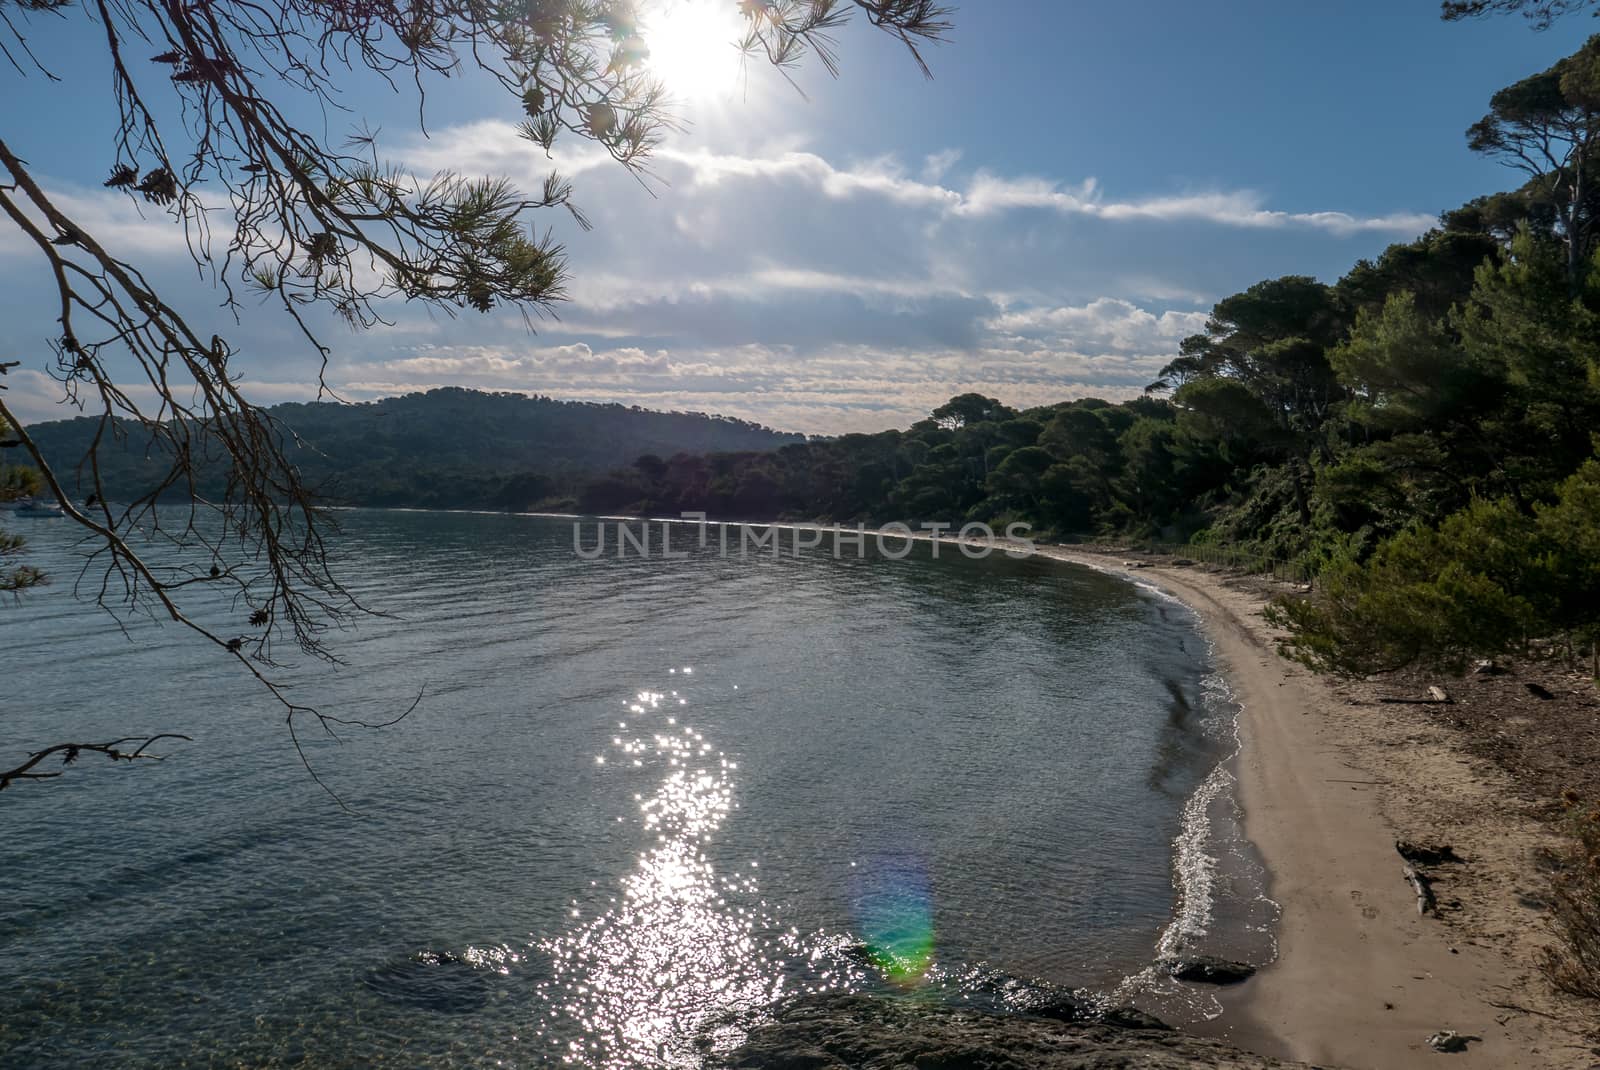 Discovery of the island of Porquerolles in summer. Deserted beaches and pine trees in this landscape of the French Riviera, Var.